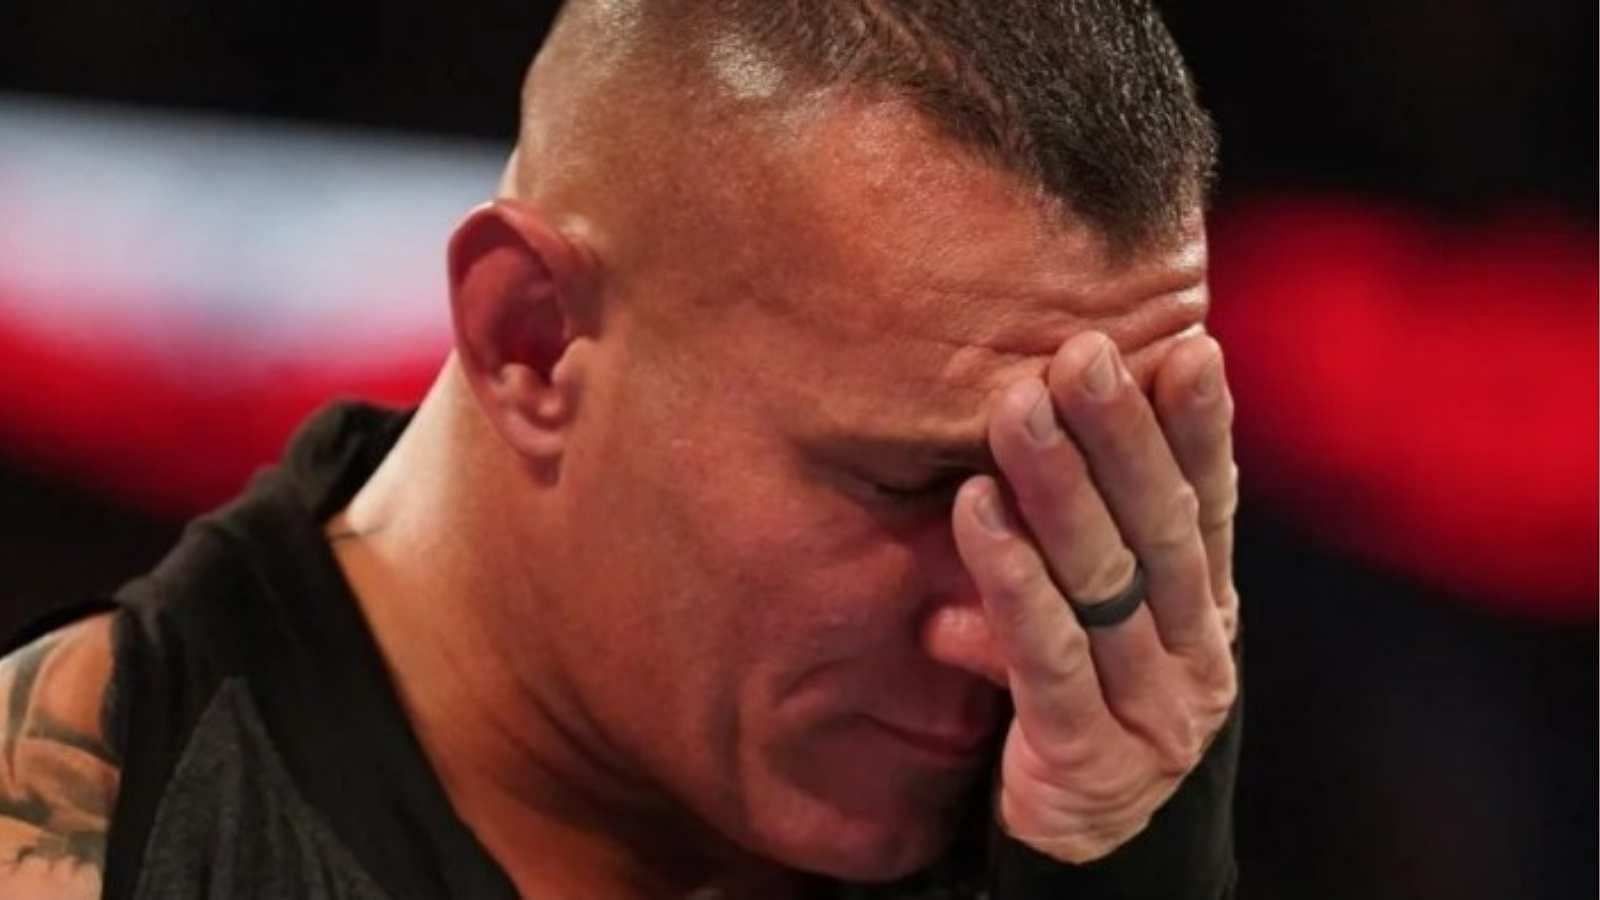 Orton is currently on a hiatus